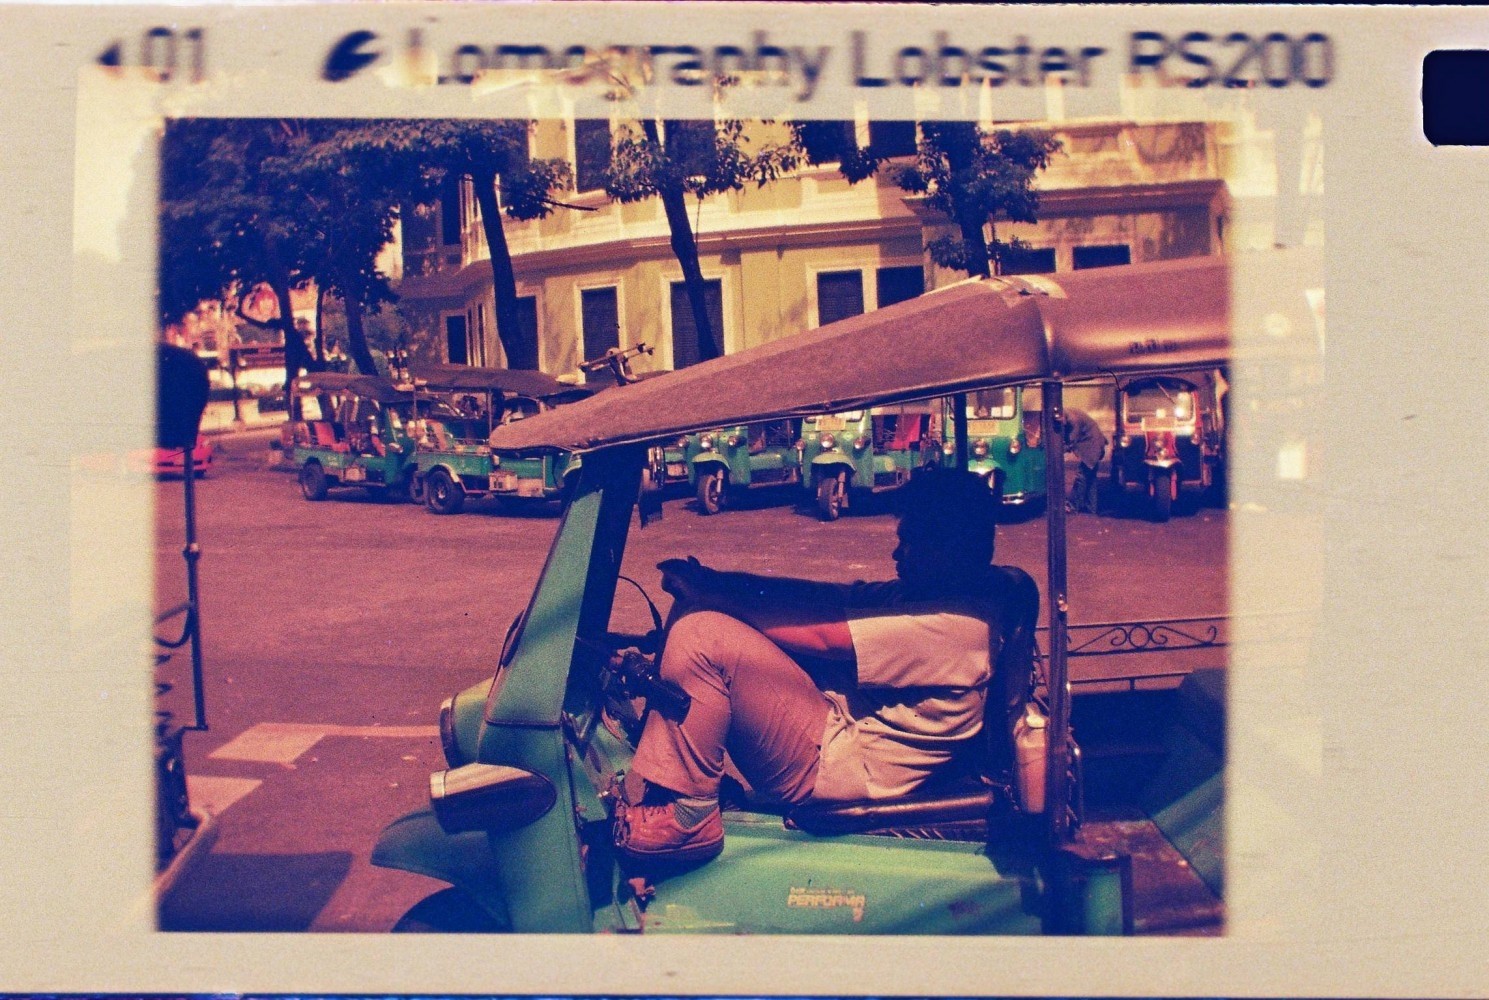 Lobster Redscale 110 ISO 200